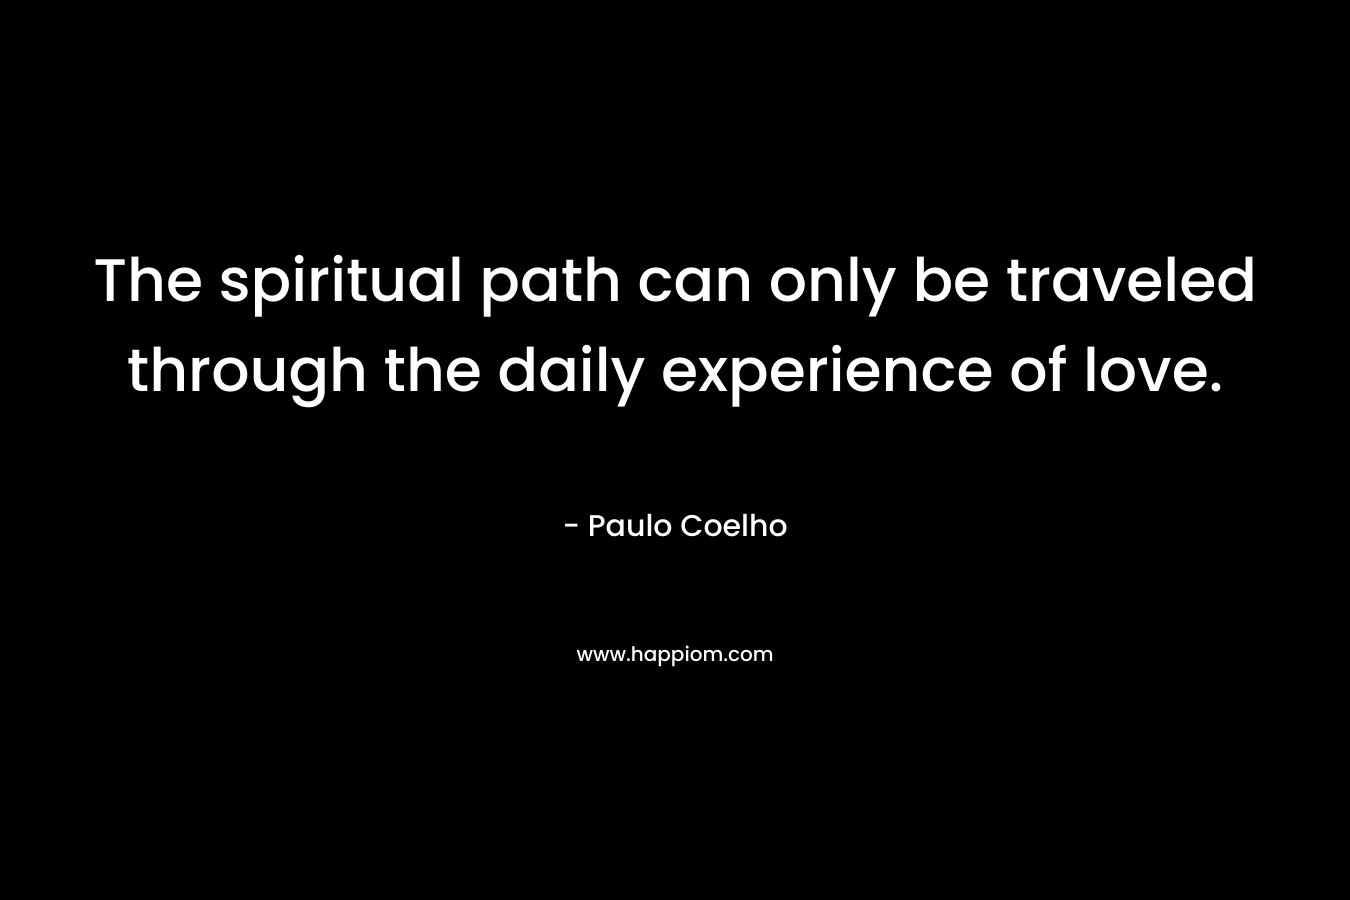 The spiritual path can only be traveled through the daily experience of love. – Paulo Coelho